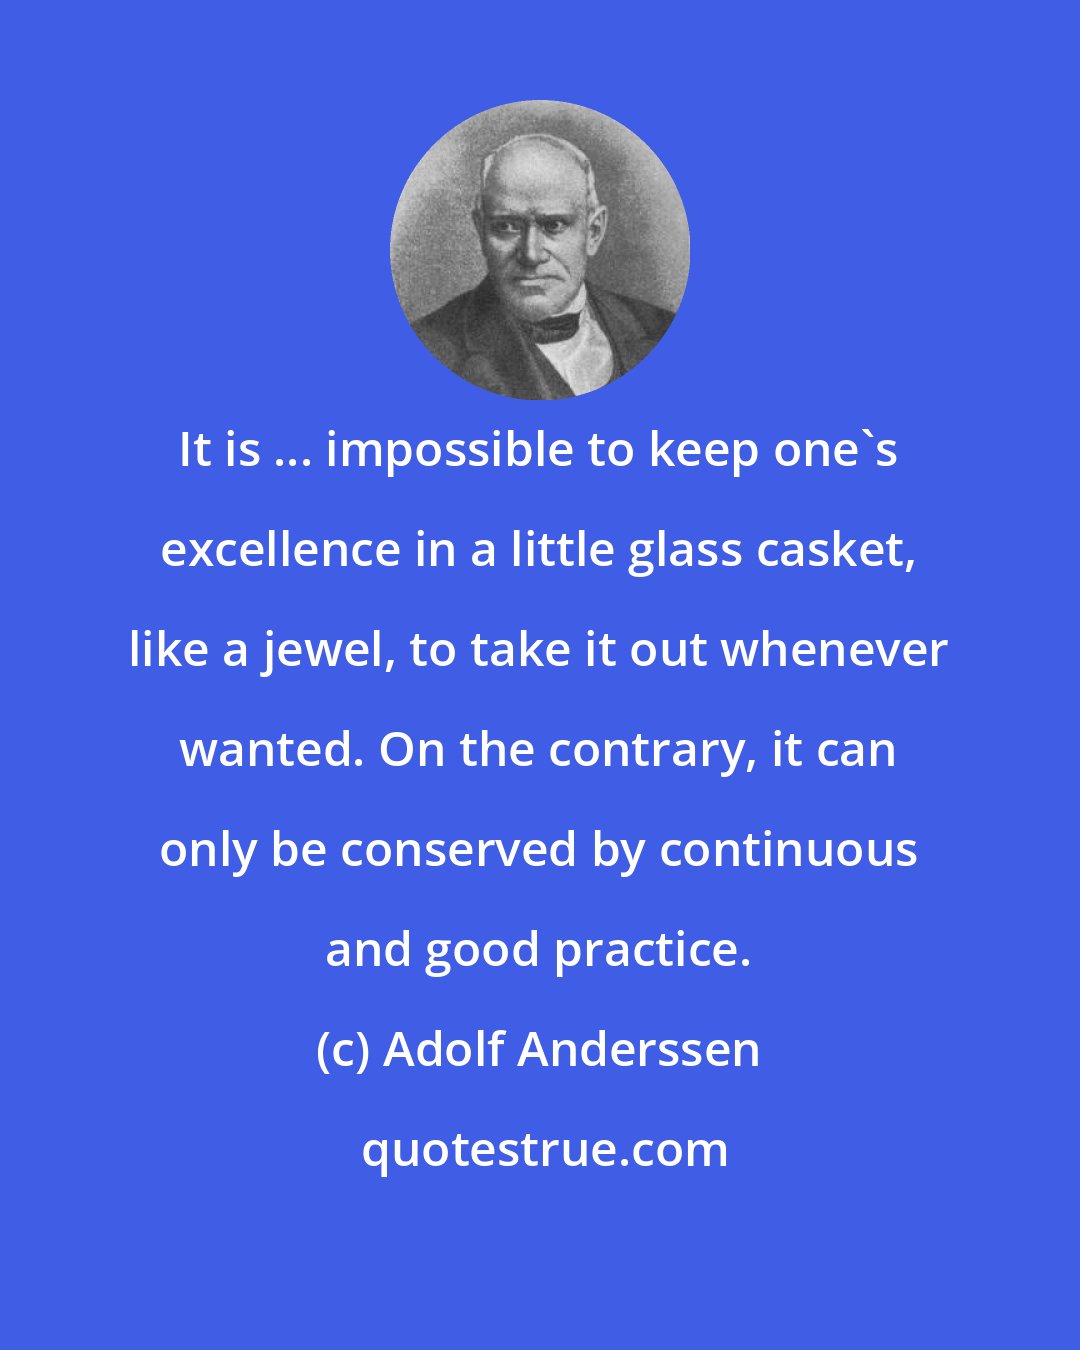 Adolf Anderssen: It is ... impossible to keep one's excellence in a little glass casket, like a jewel, to take it out whenever wanted. On the contrary, it can only be conserved by continuous and good practice.